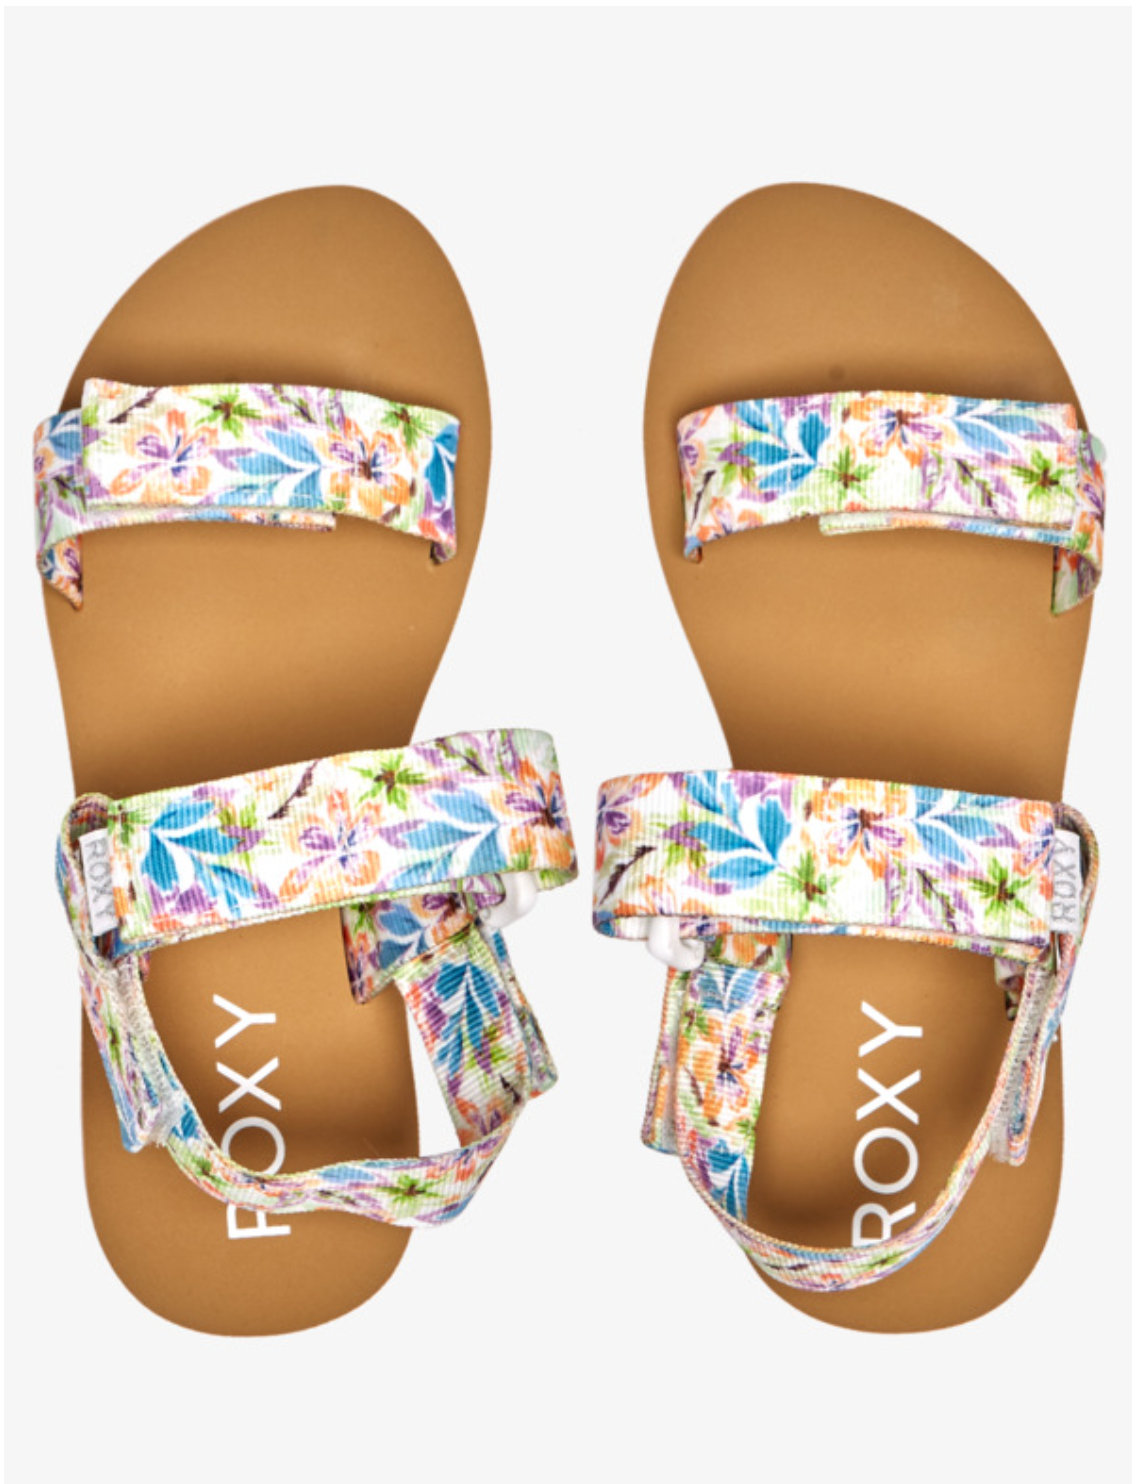 Roxy Cage - Sandals for Women===SALE ===